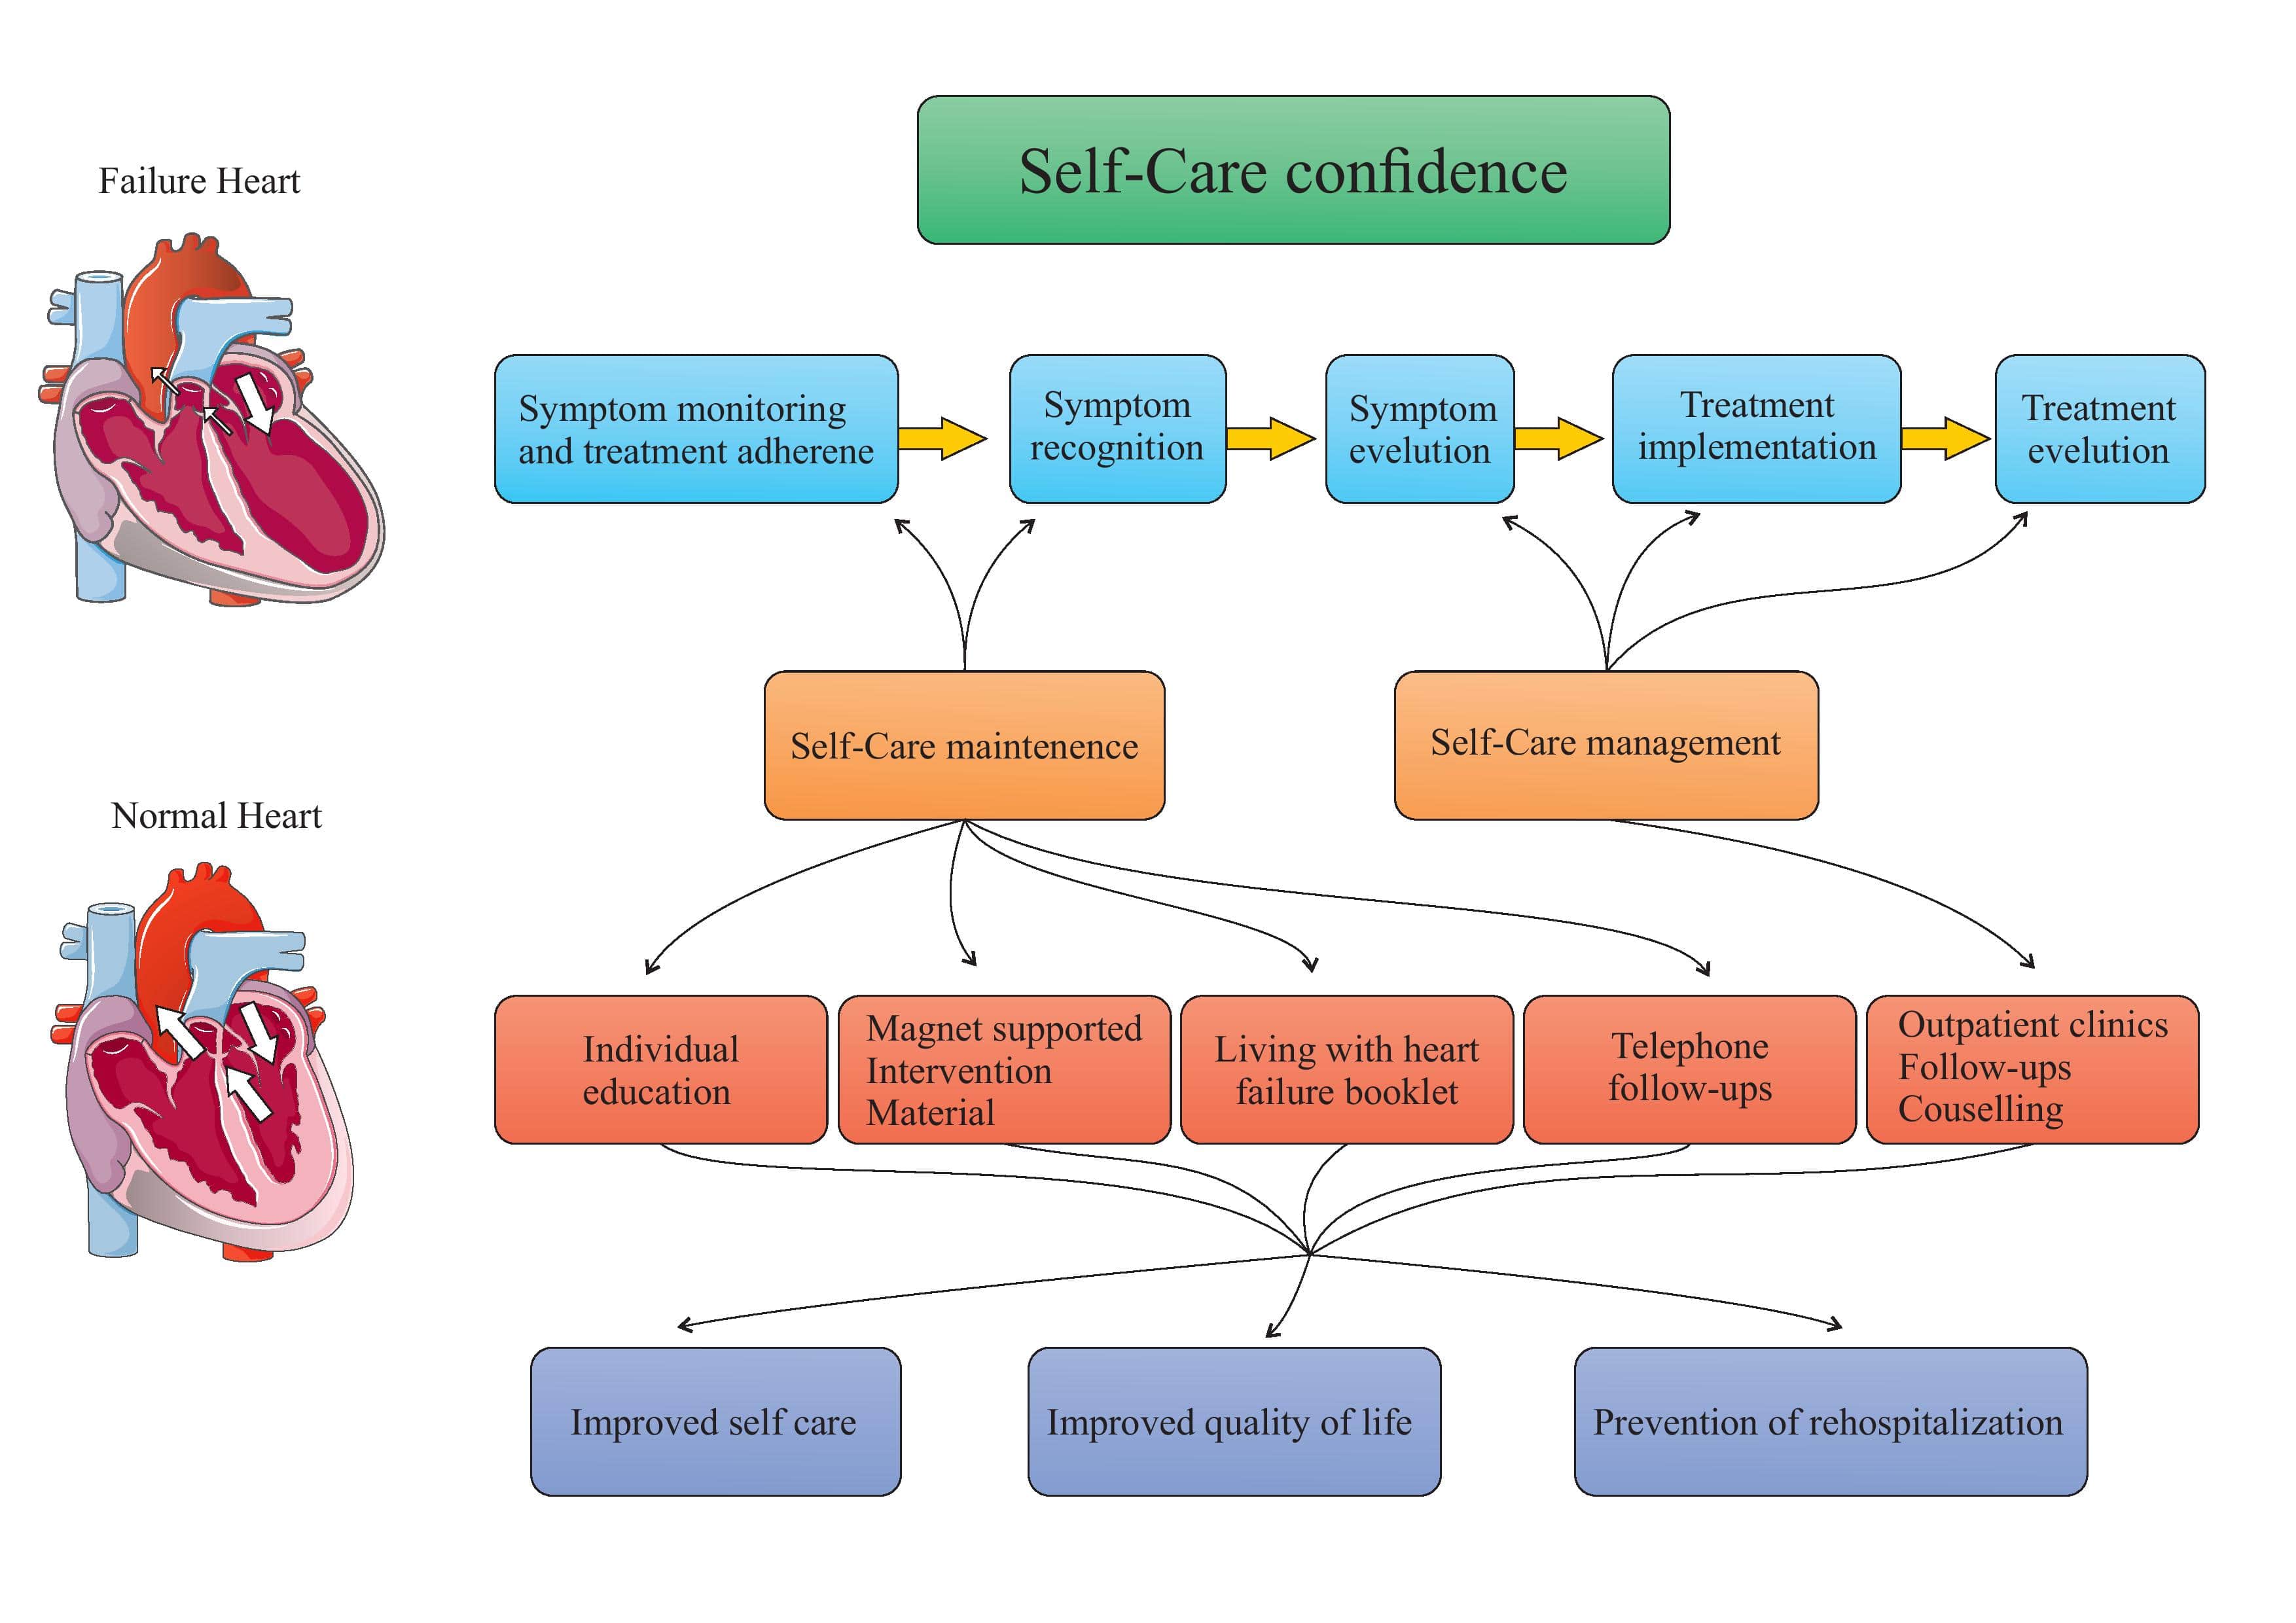 Self-care behaviors and related factors in chronic heart failure patients 